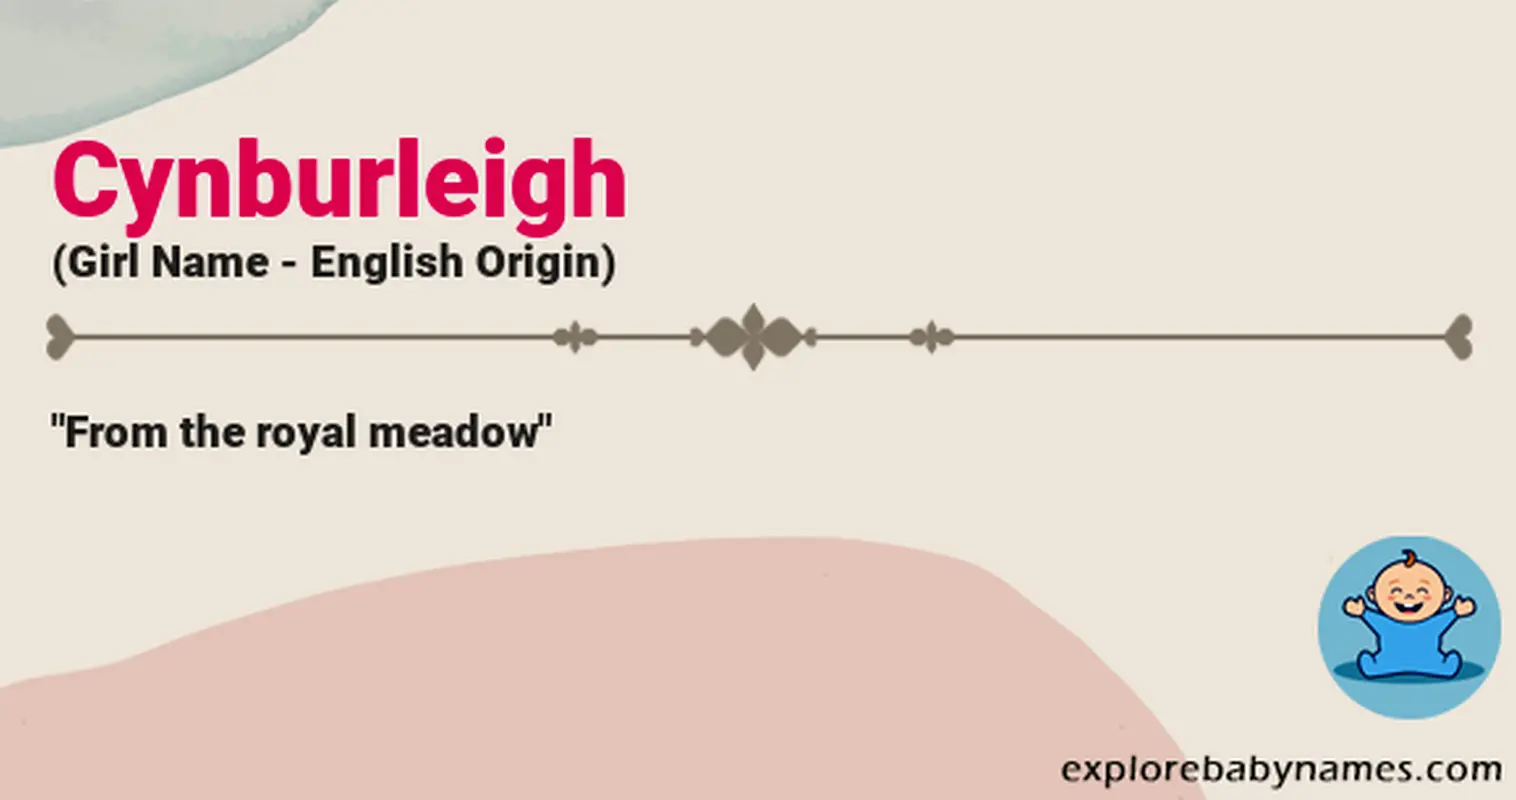 Meaning of Cynburleigh